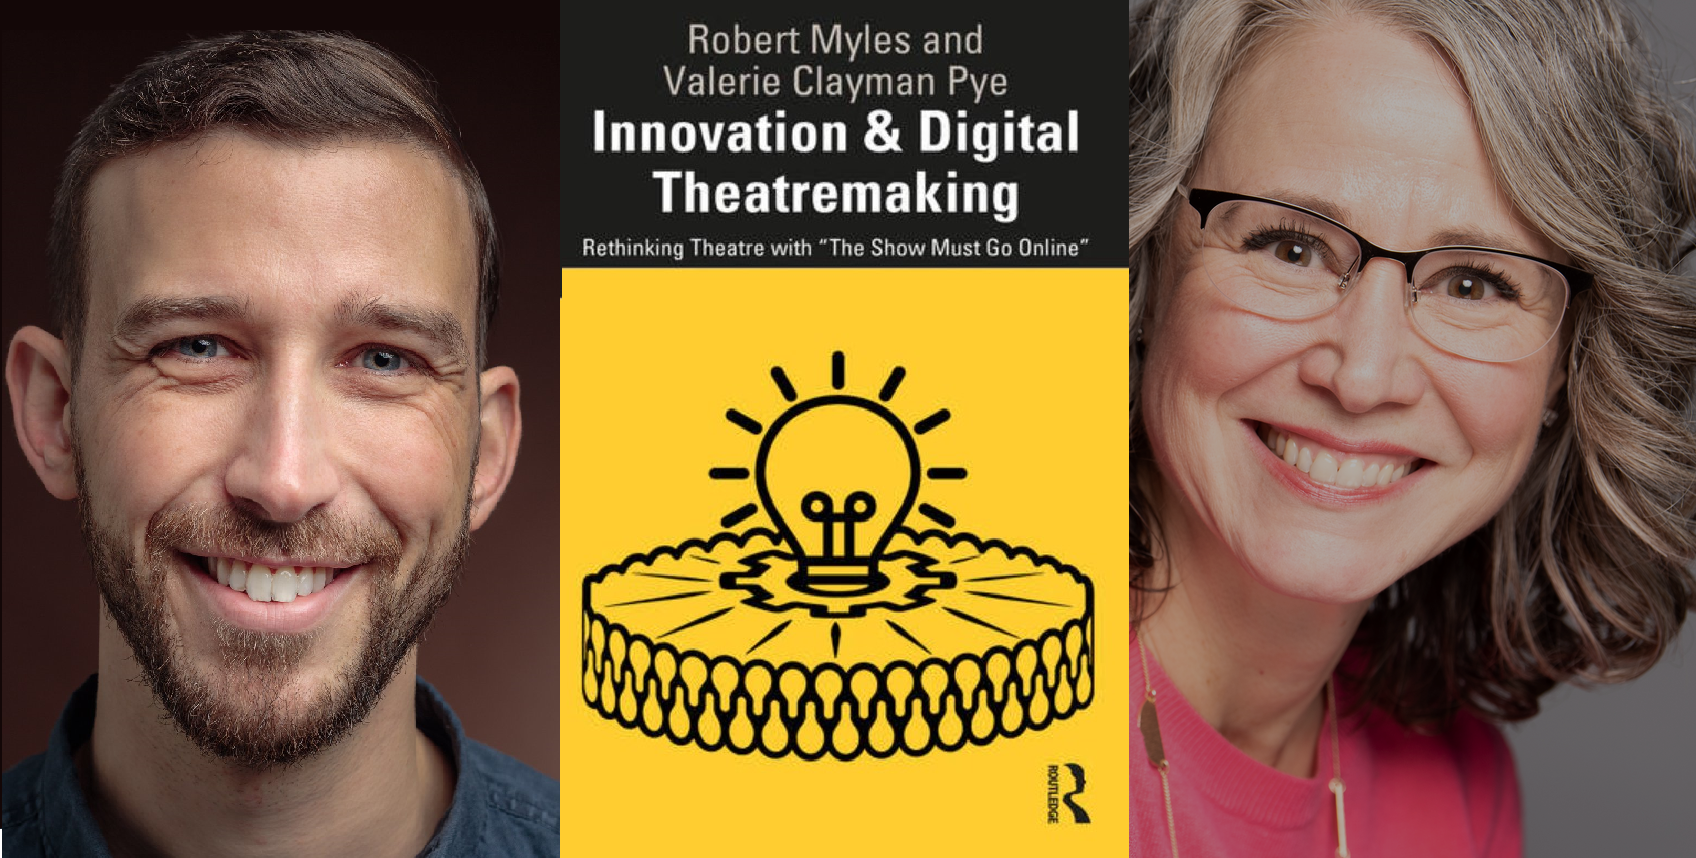 Online Book Launch - Innovation & Digital Theatremaking: Rethinking Theatre with “The Show Must Go Online”